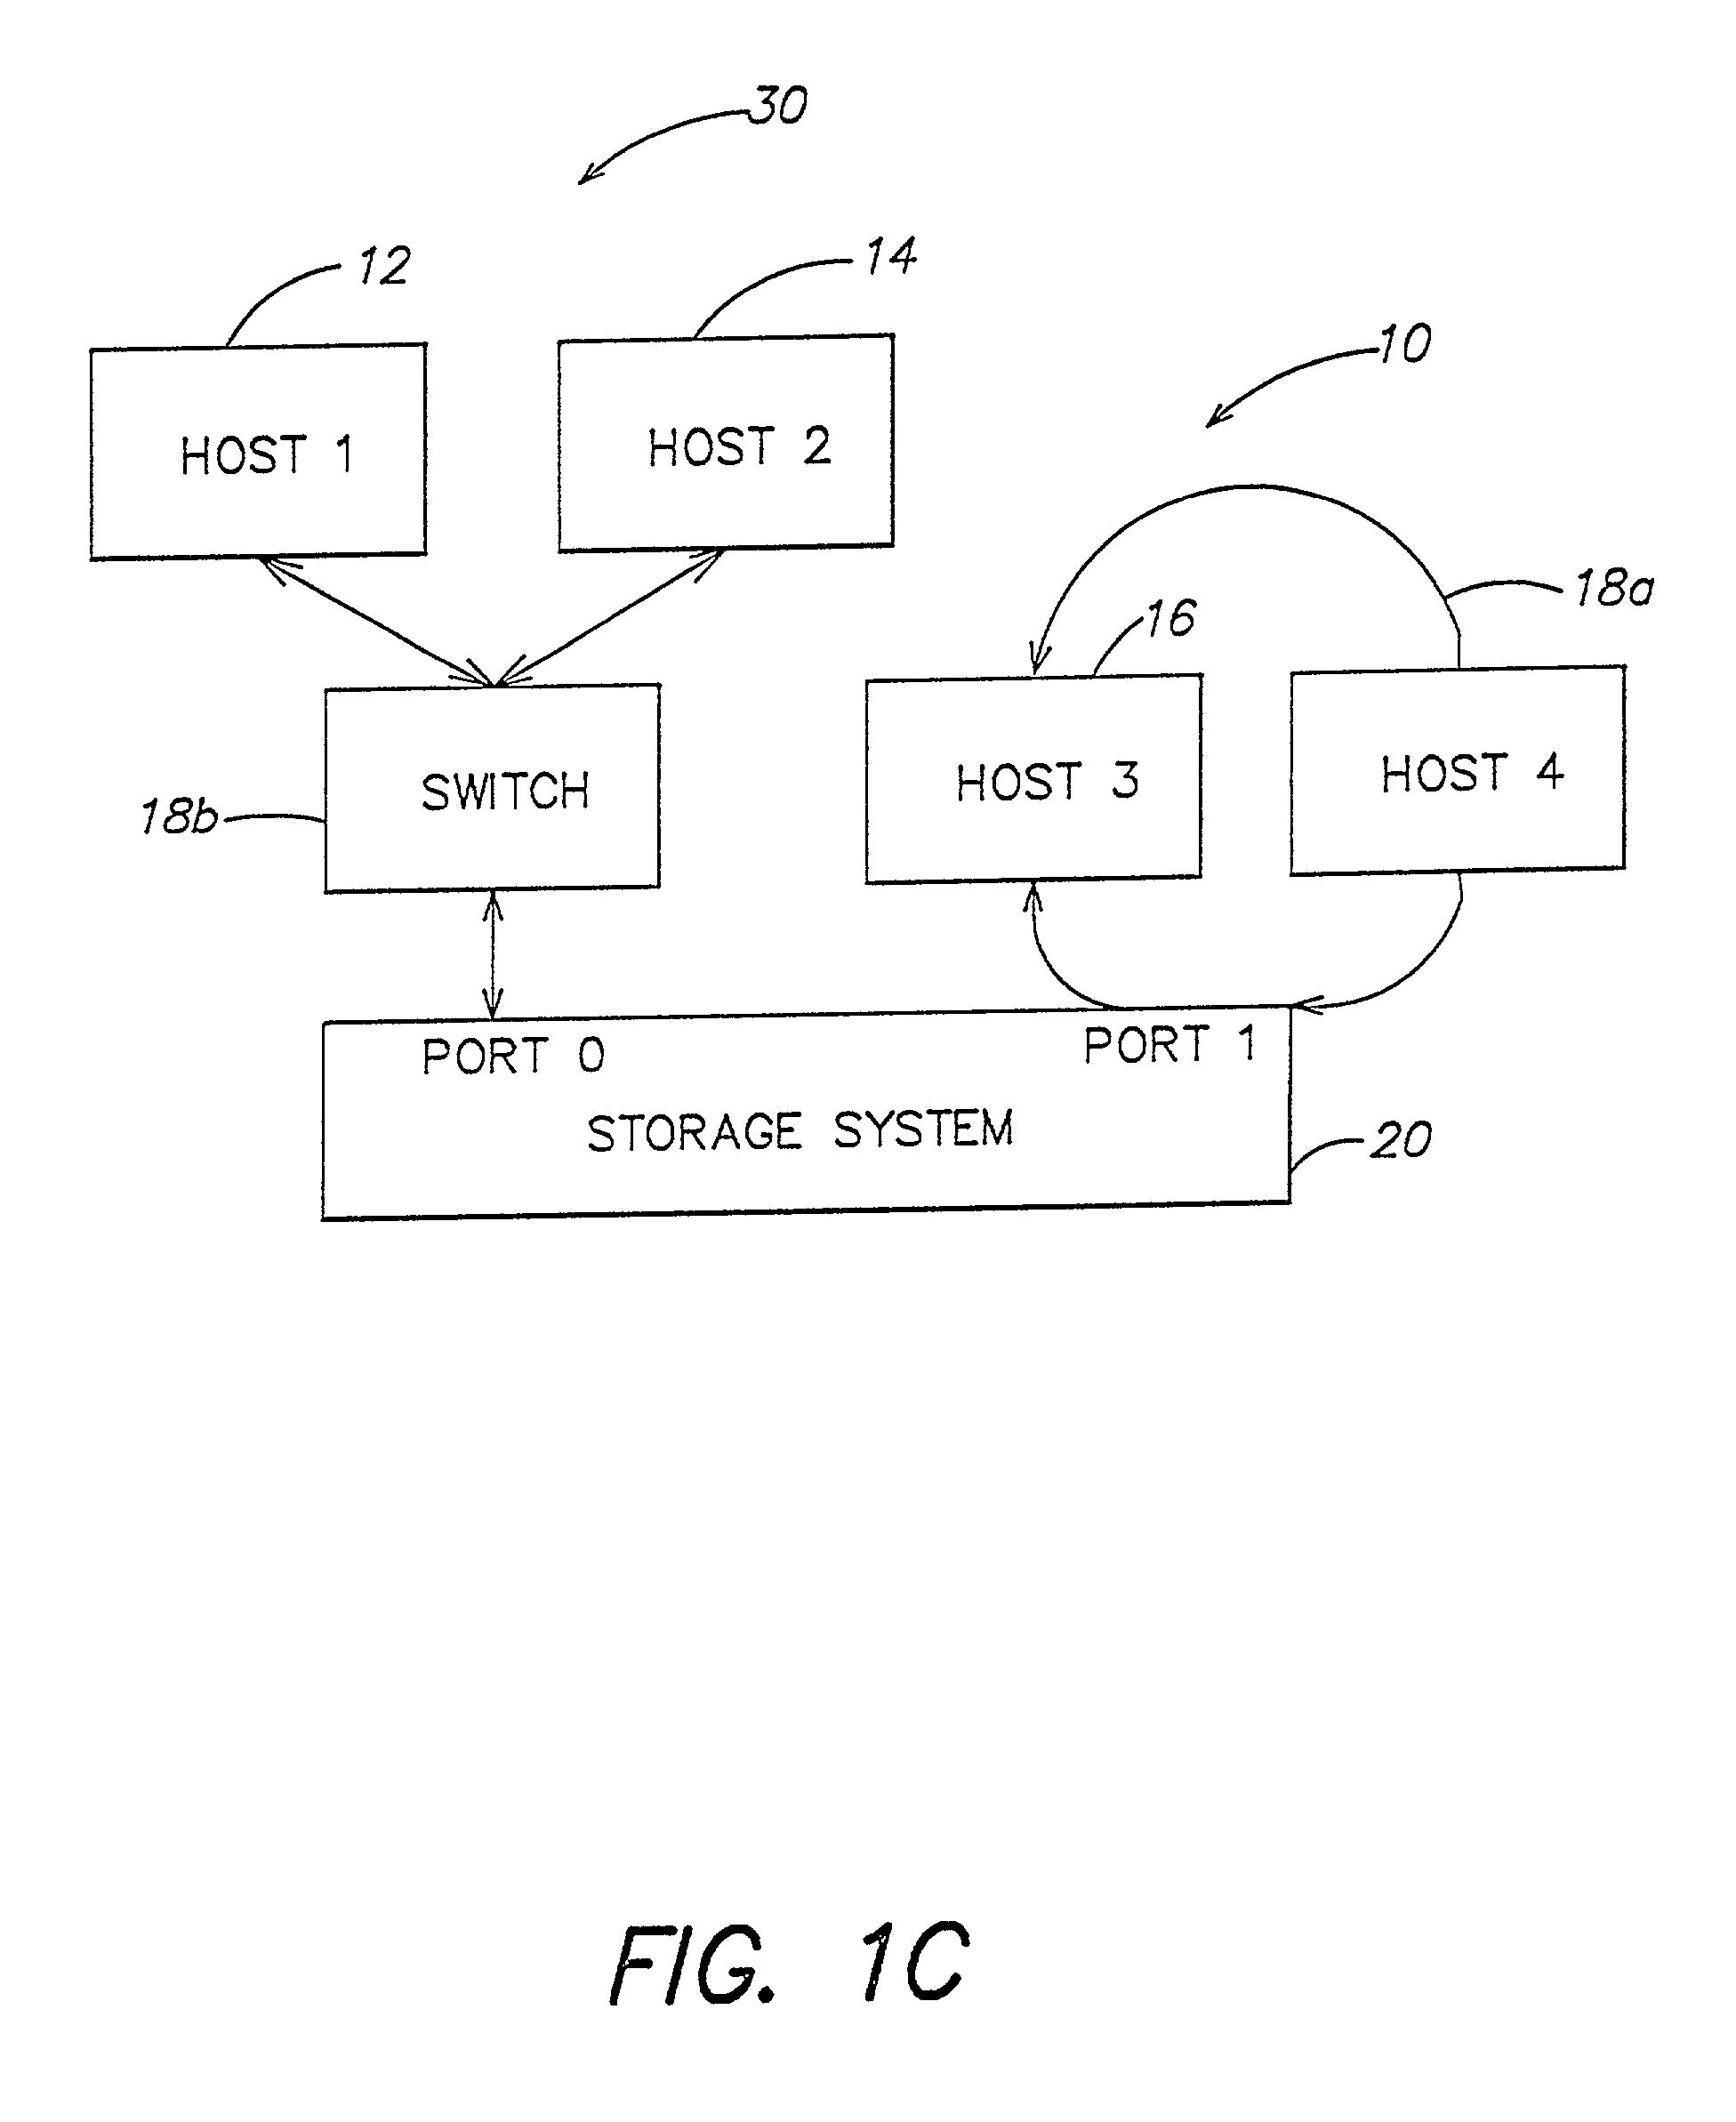 Method and apparatus for managing access to storage devices in a storage system with access control